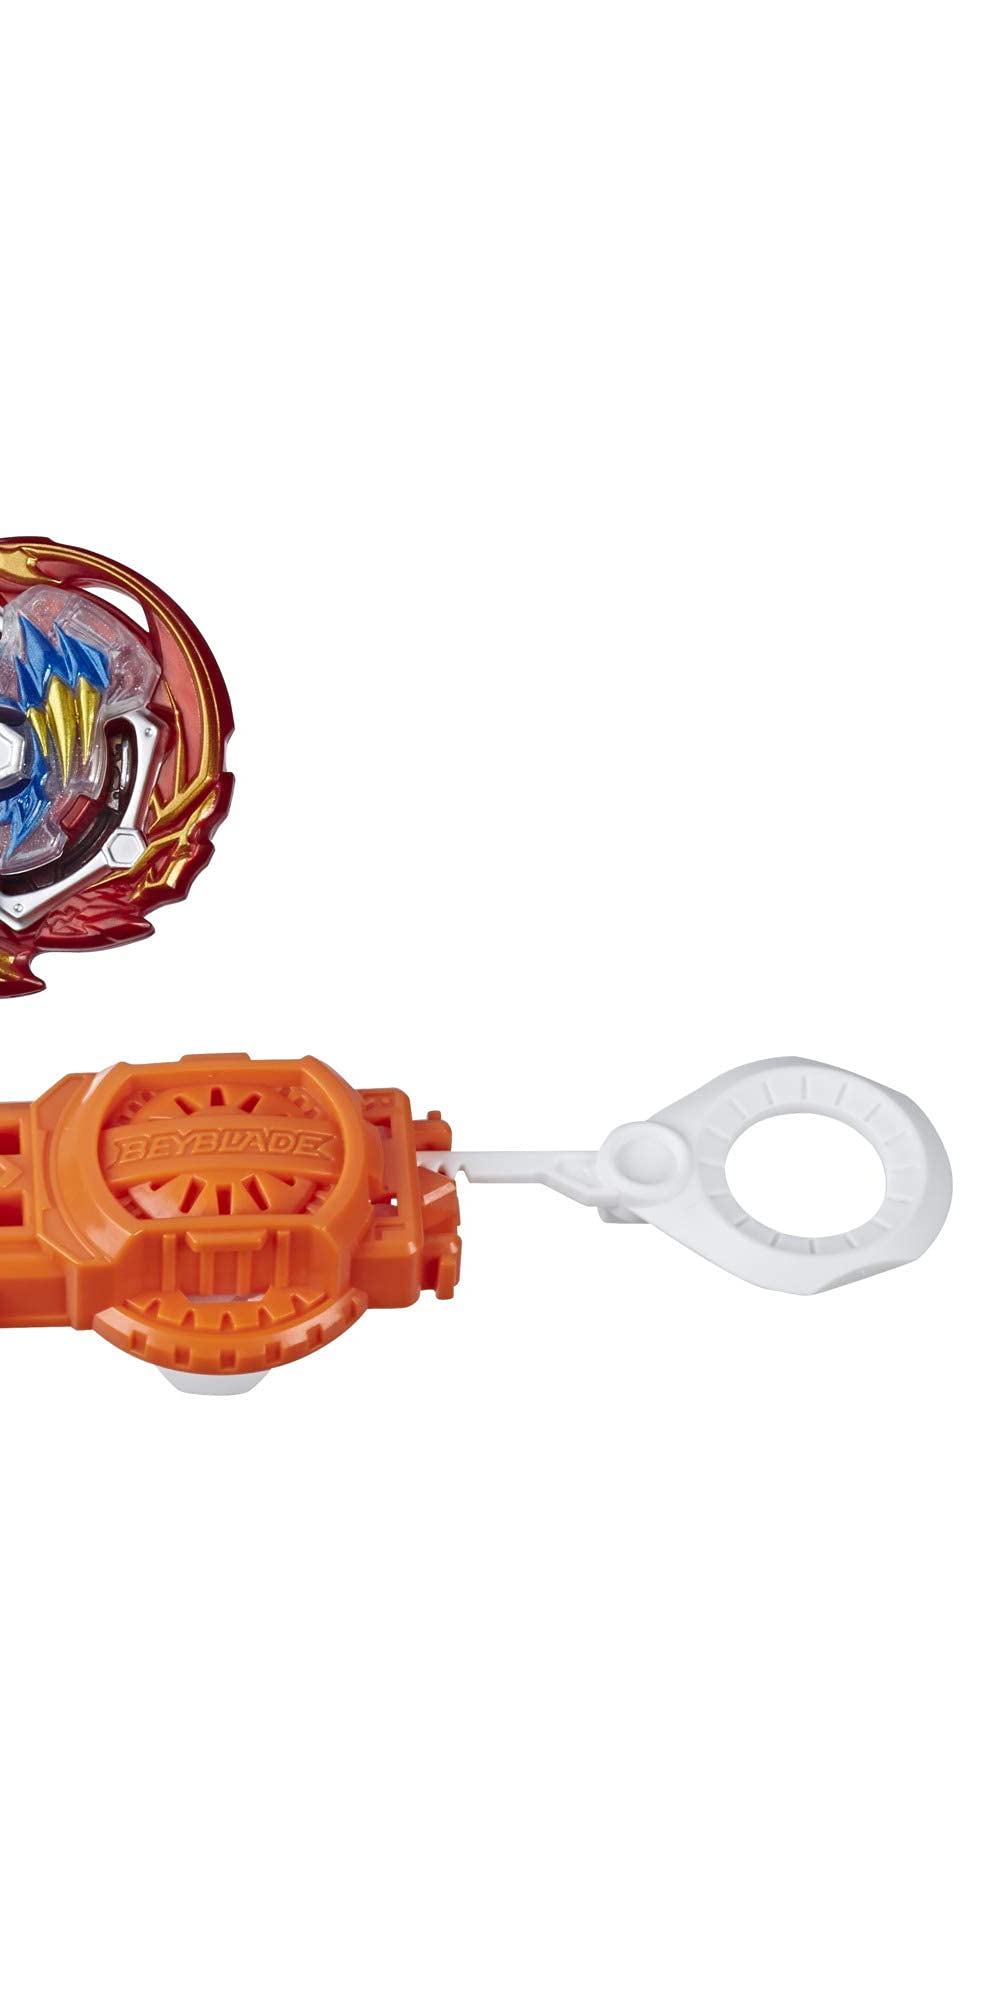 Beyblade Burst Rise Hypersphere Glyph Dragon D5 Starter Pack -- Stamina Type Battling Top Toy and Right/Left-Spin Launcher, Ages 8 and Up